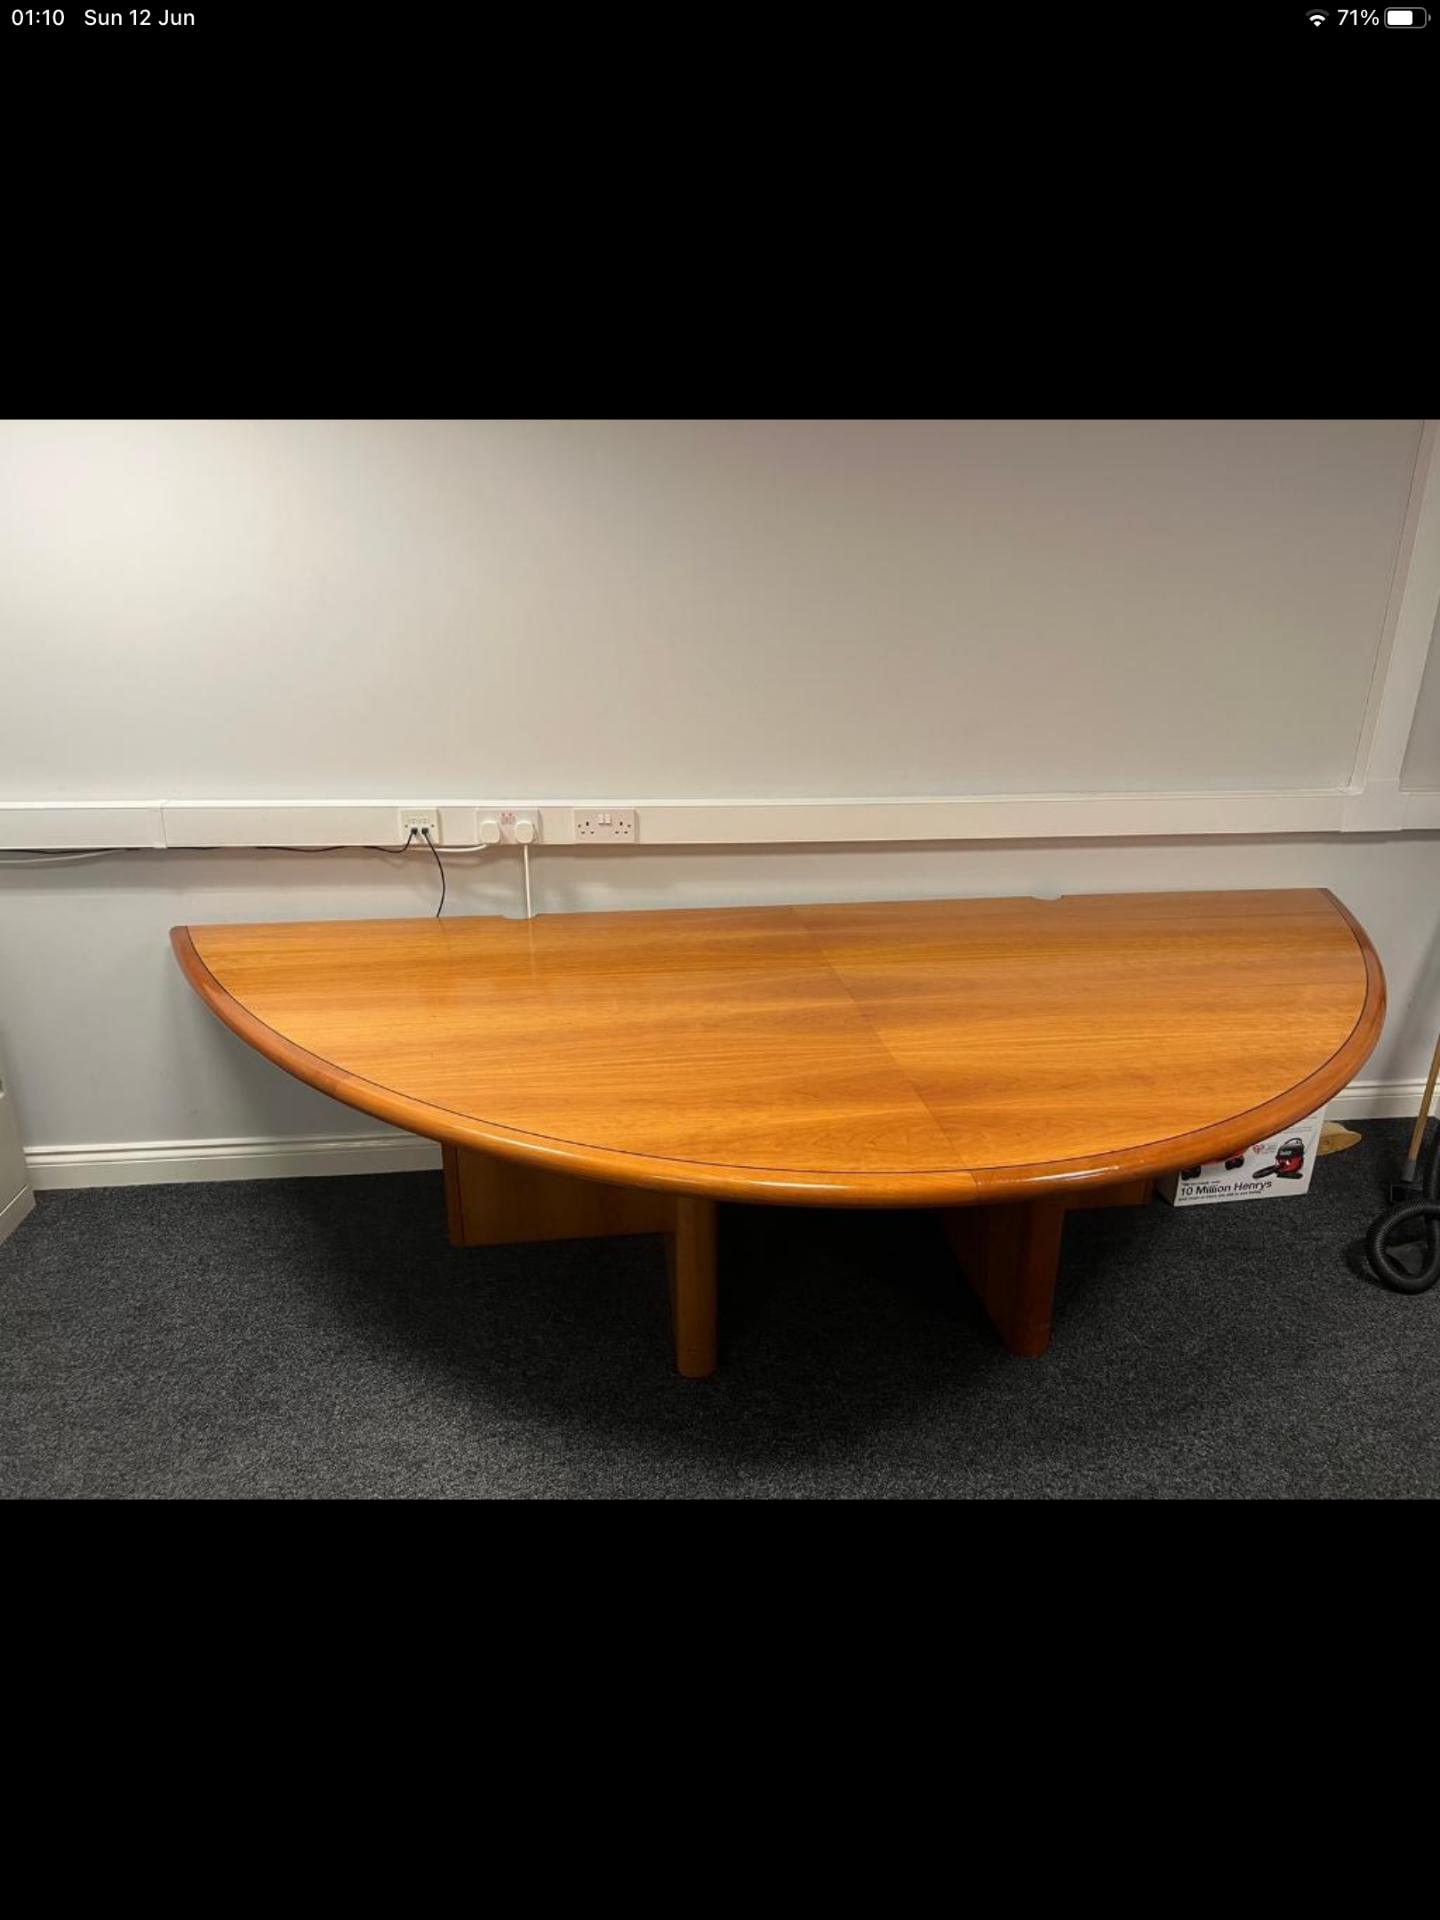 18ft x 11ft Sectional Boardroom Table - Image 3 of 3